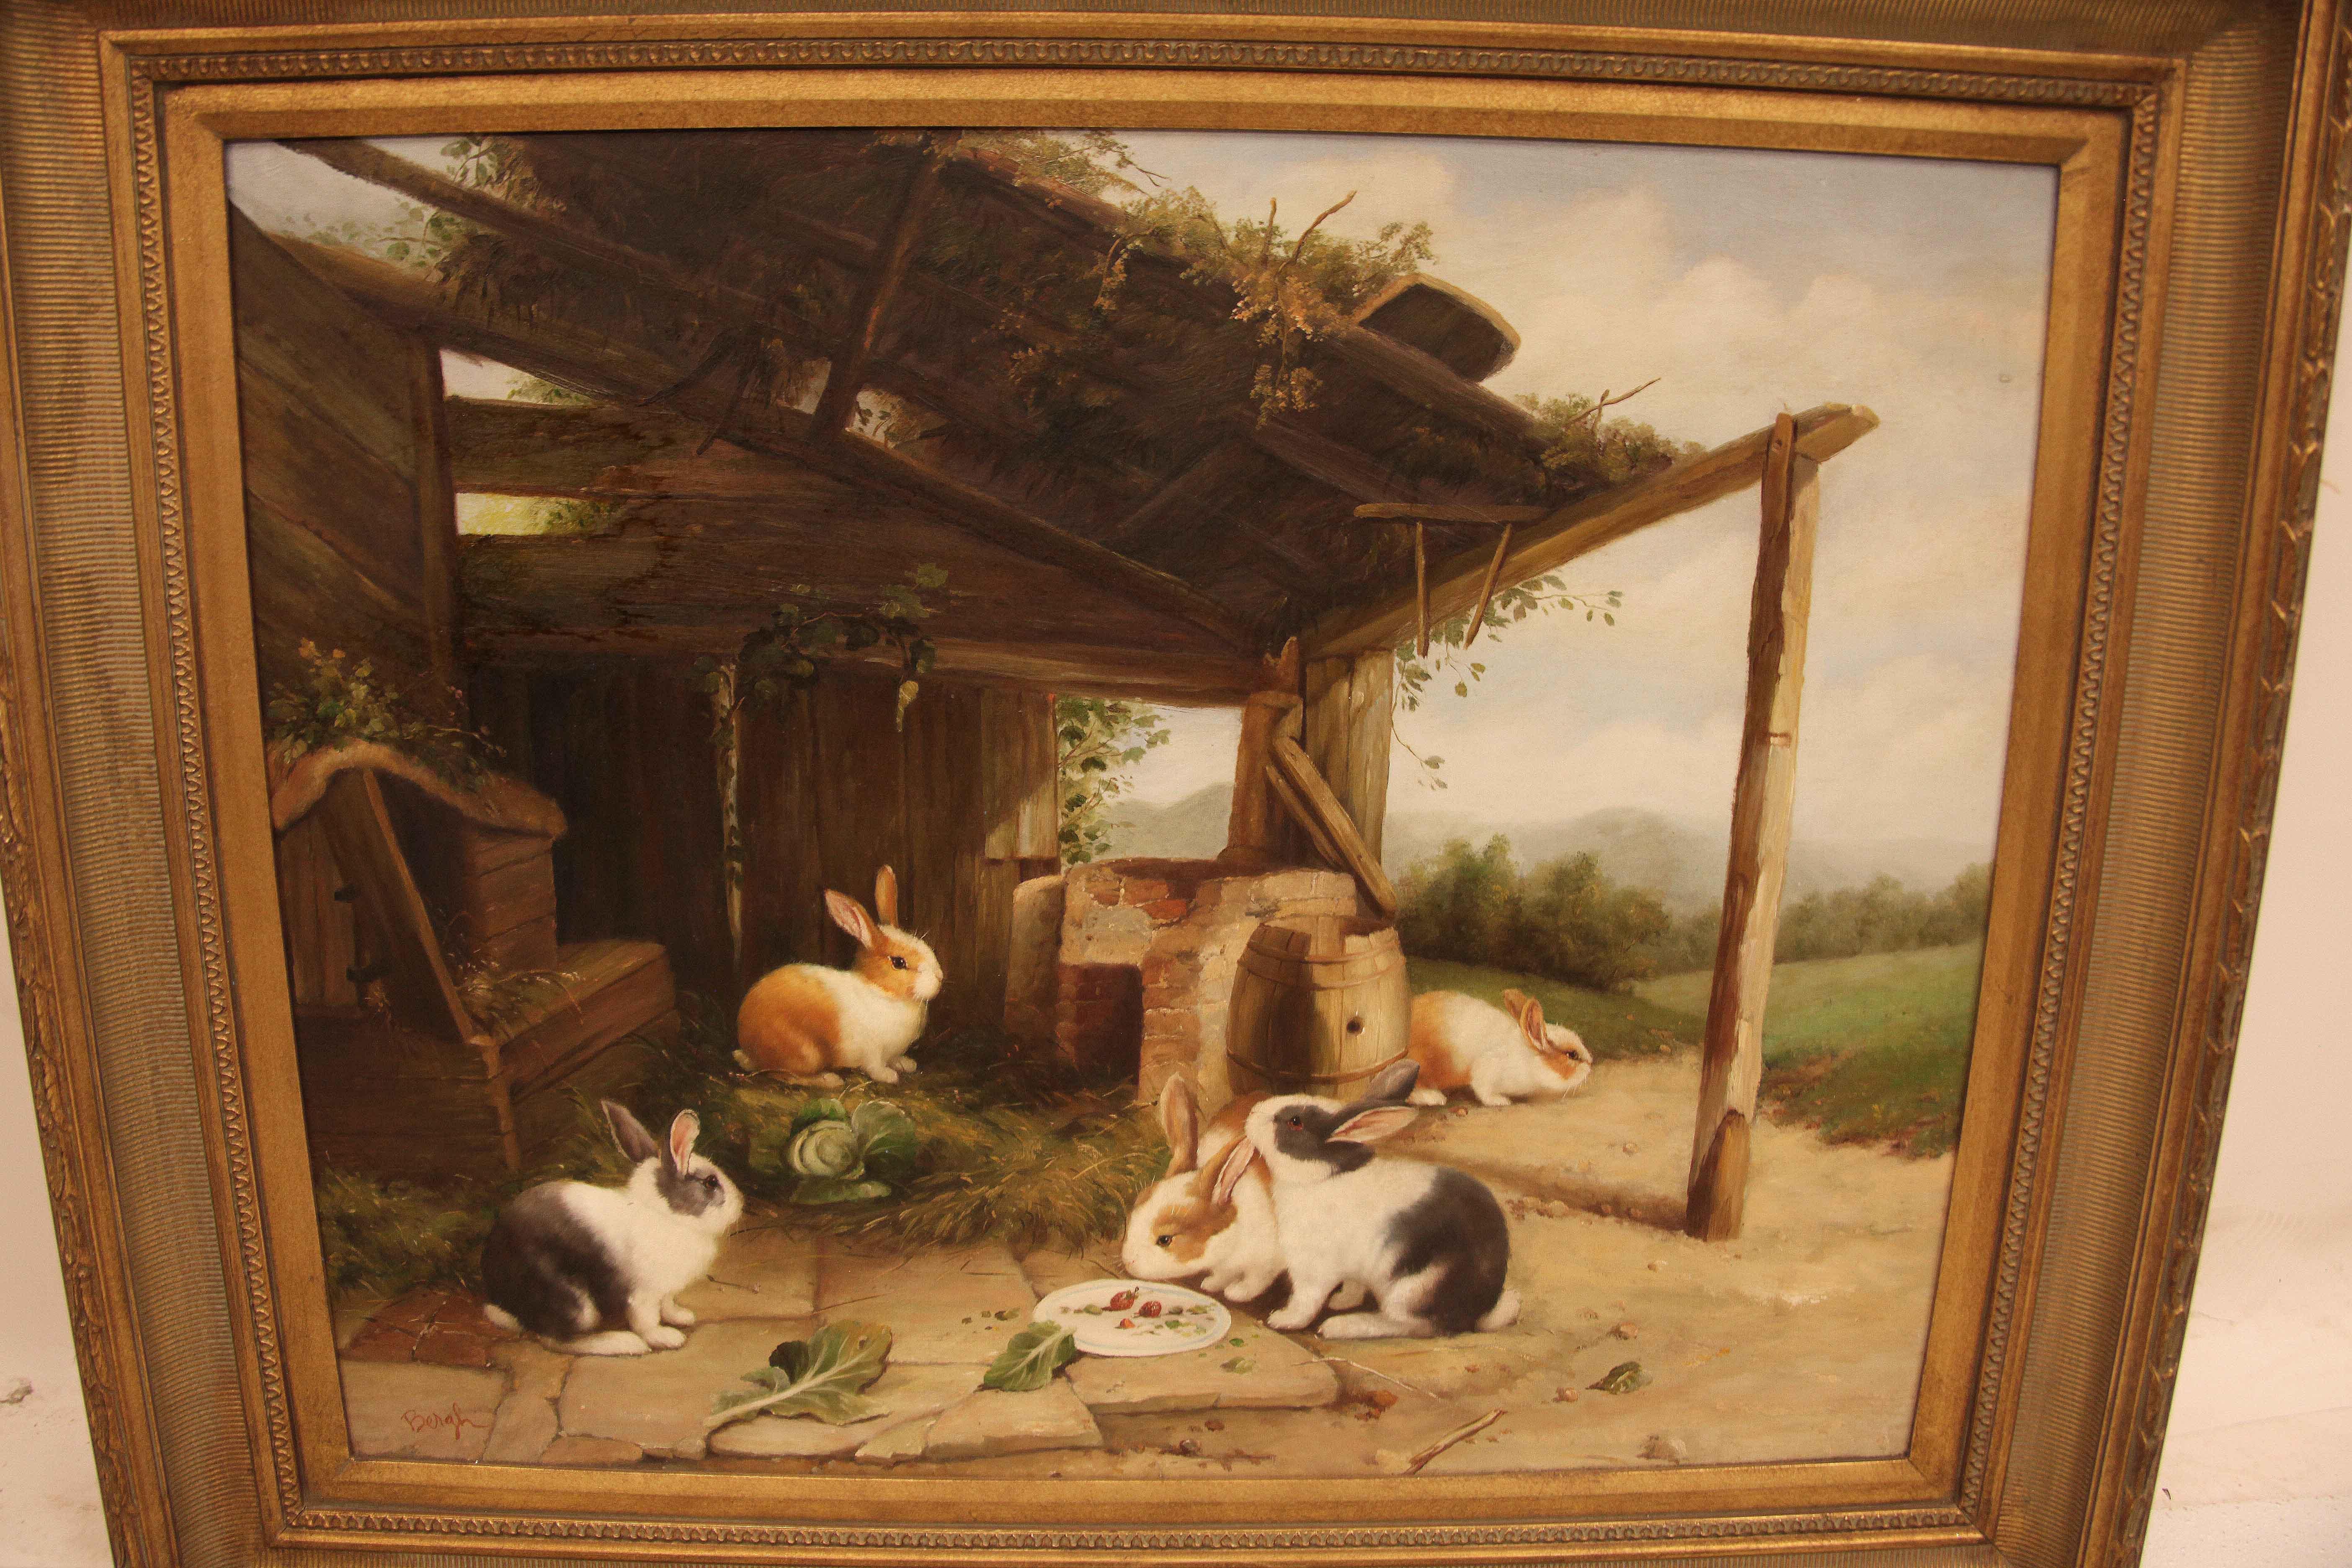 Oil painting of rabbits on canvas,  scene featuring five rabbits under shelter eating and resting.   